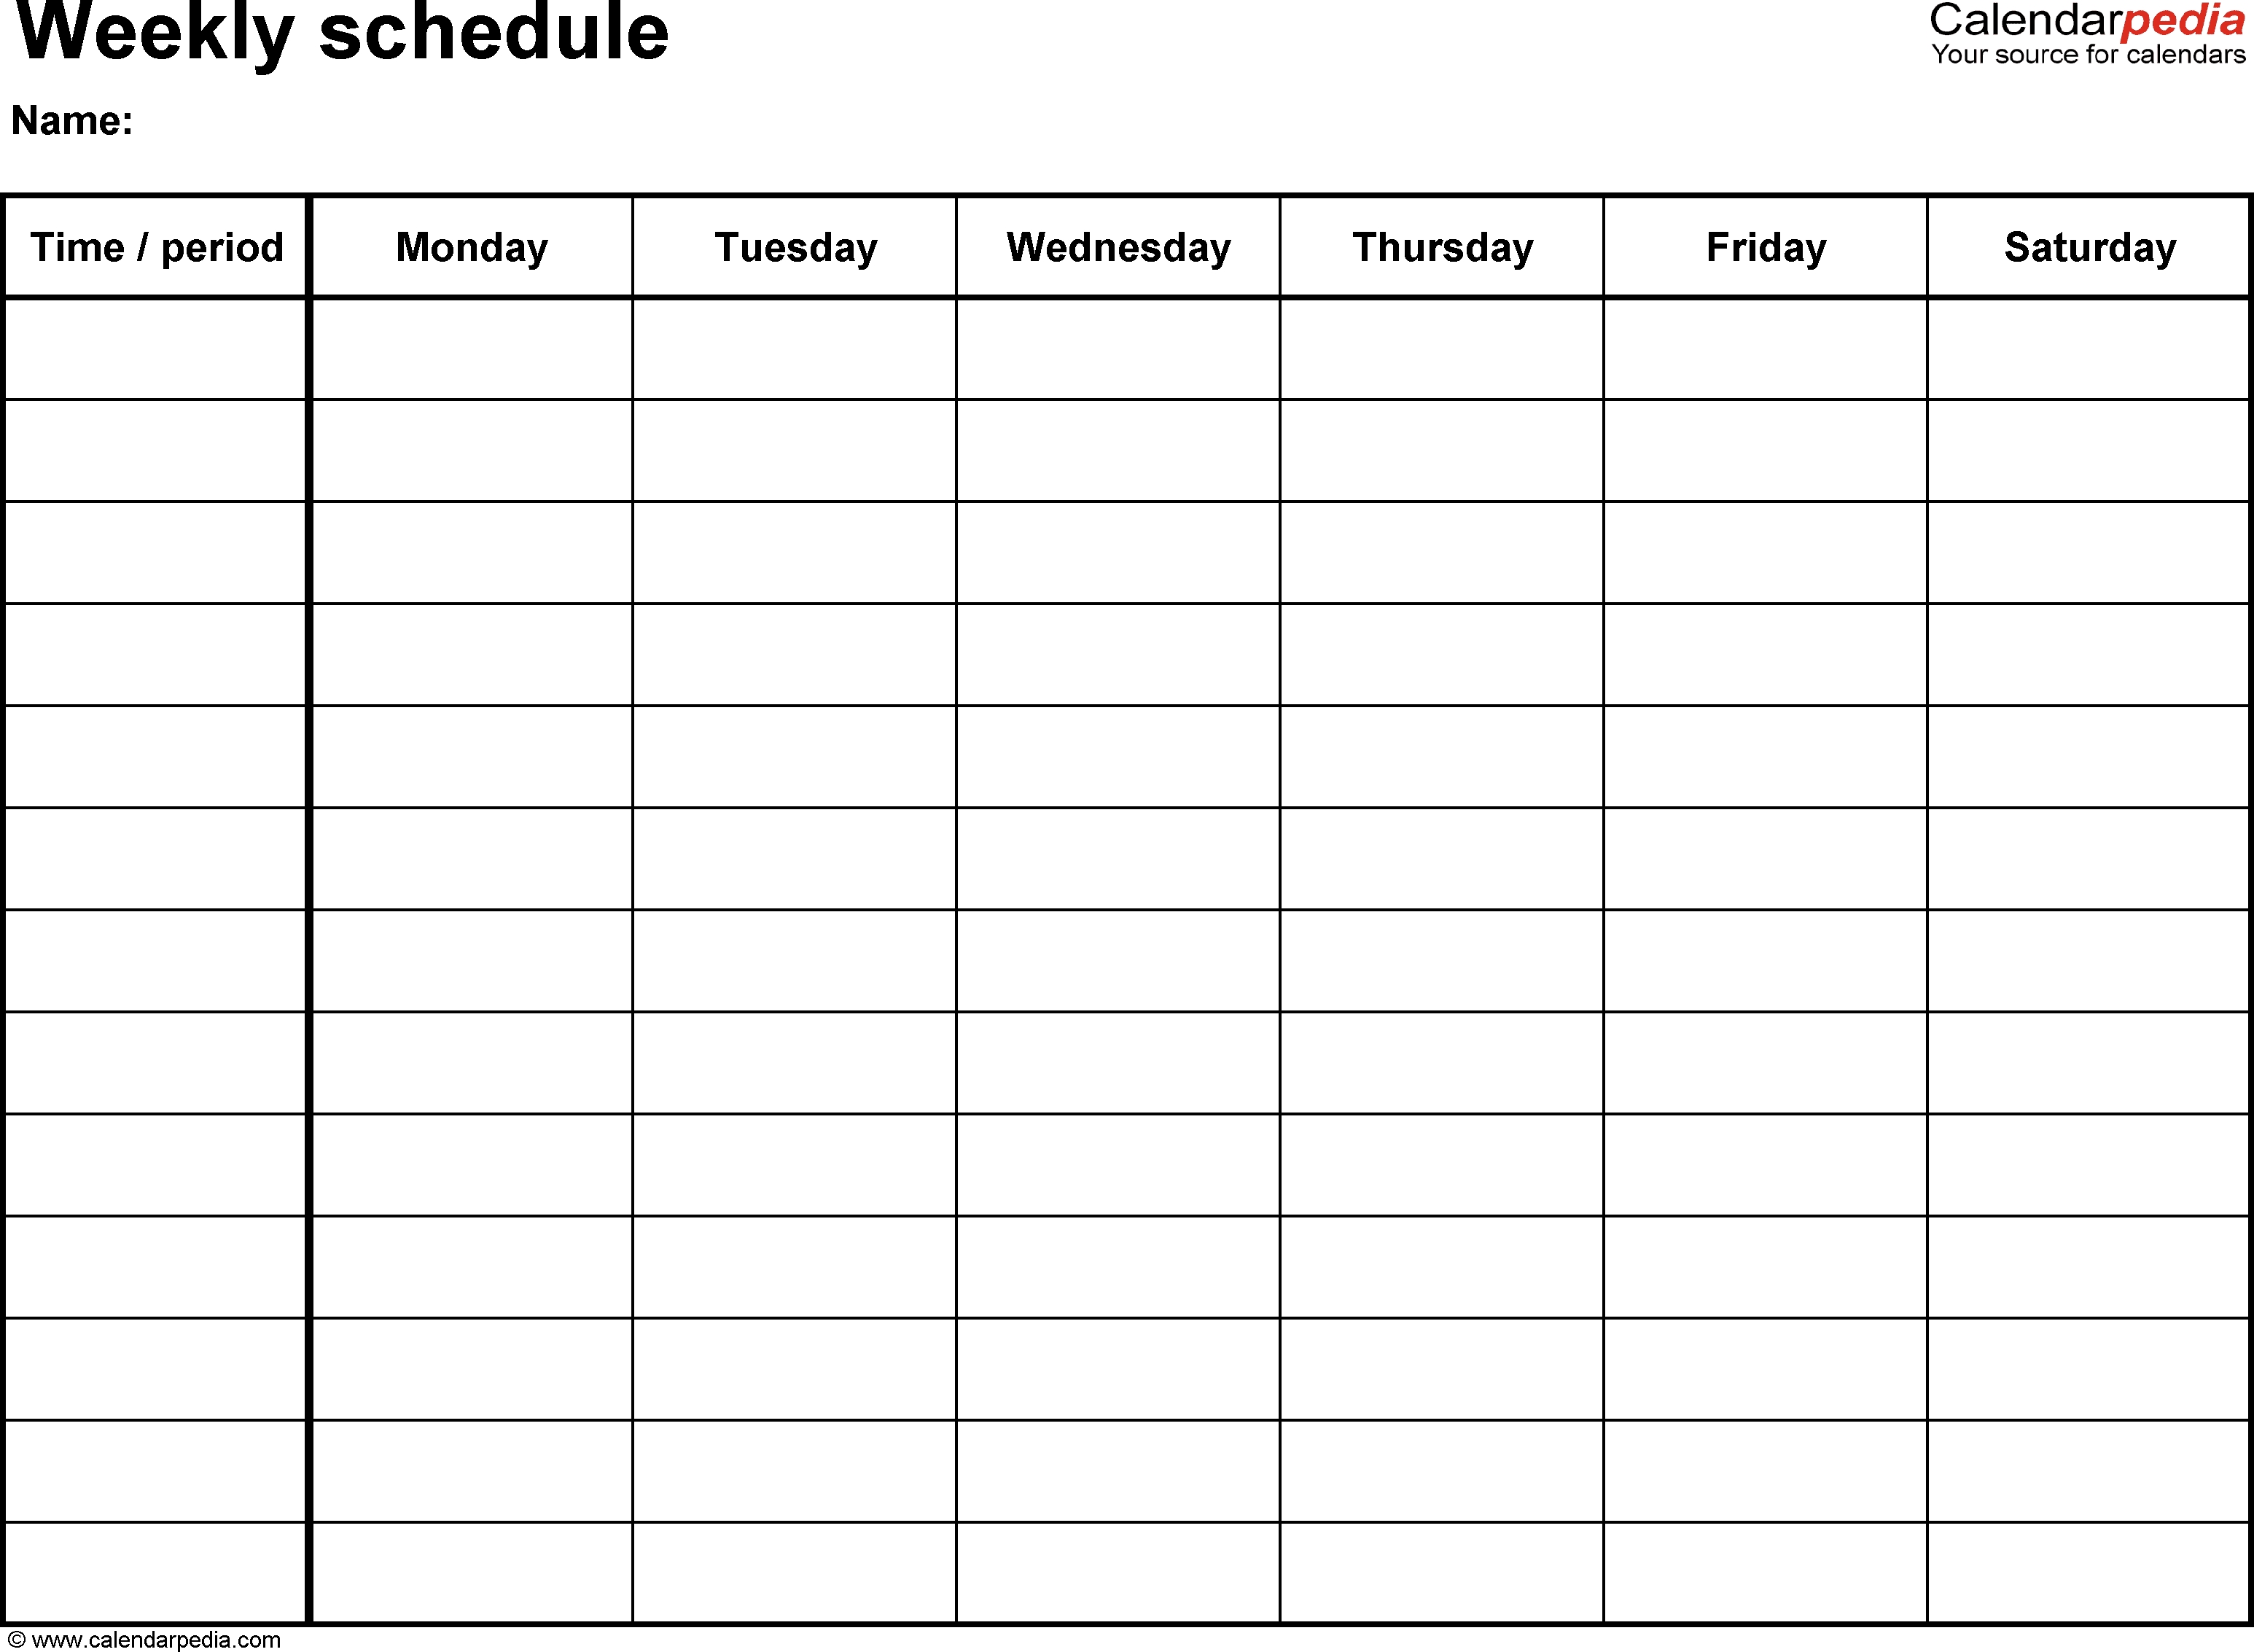 Free Weekly Schedule Templates For Excel - 18 Templates in 2 Week Schedule Template Mon- Sunday